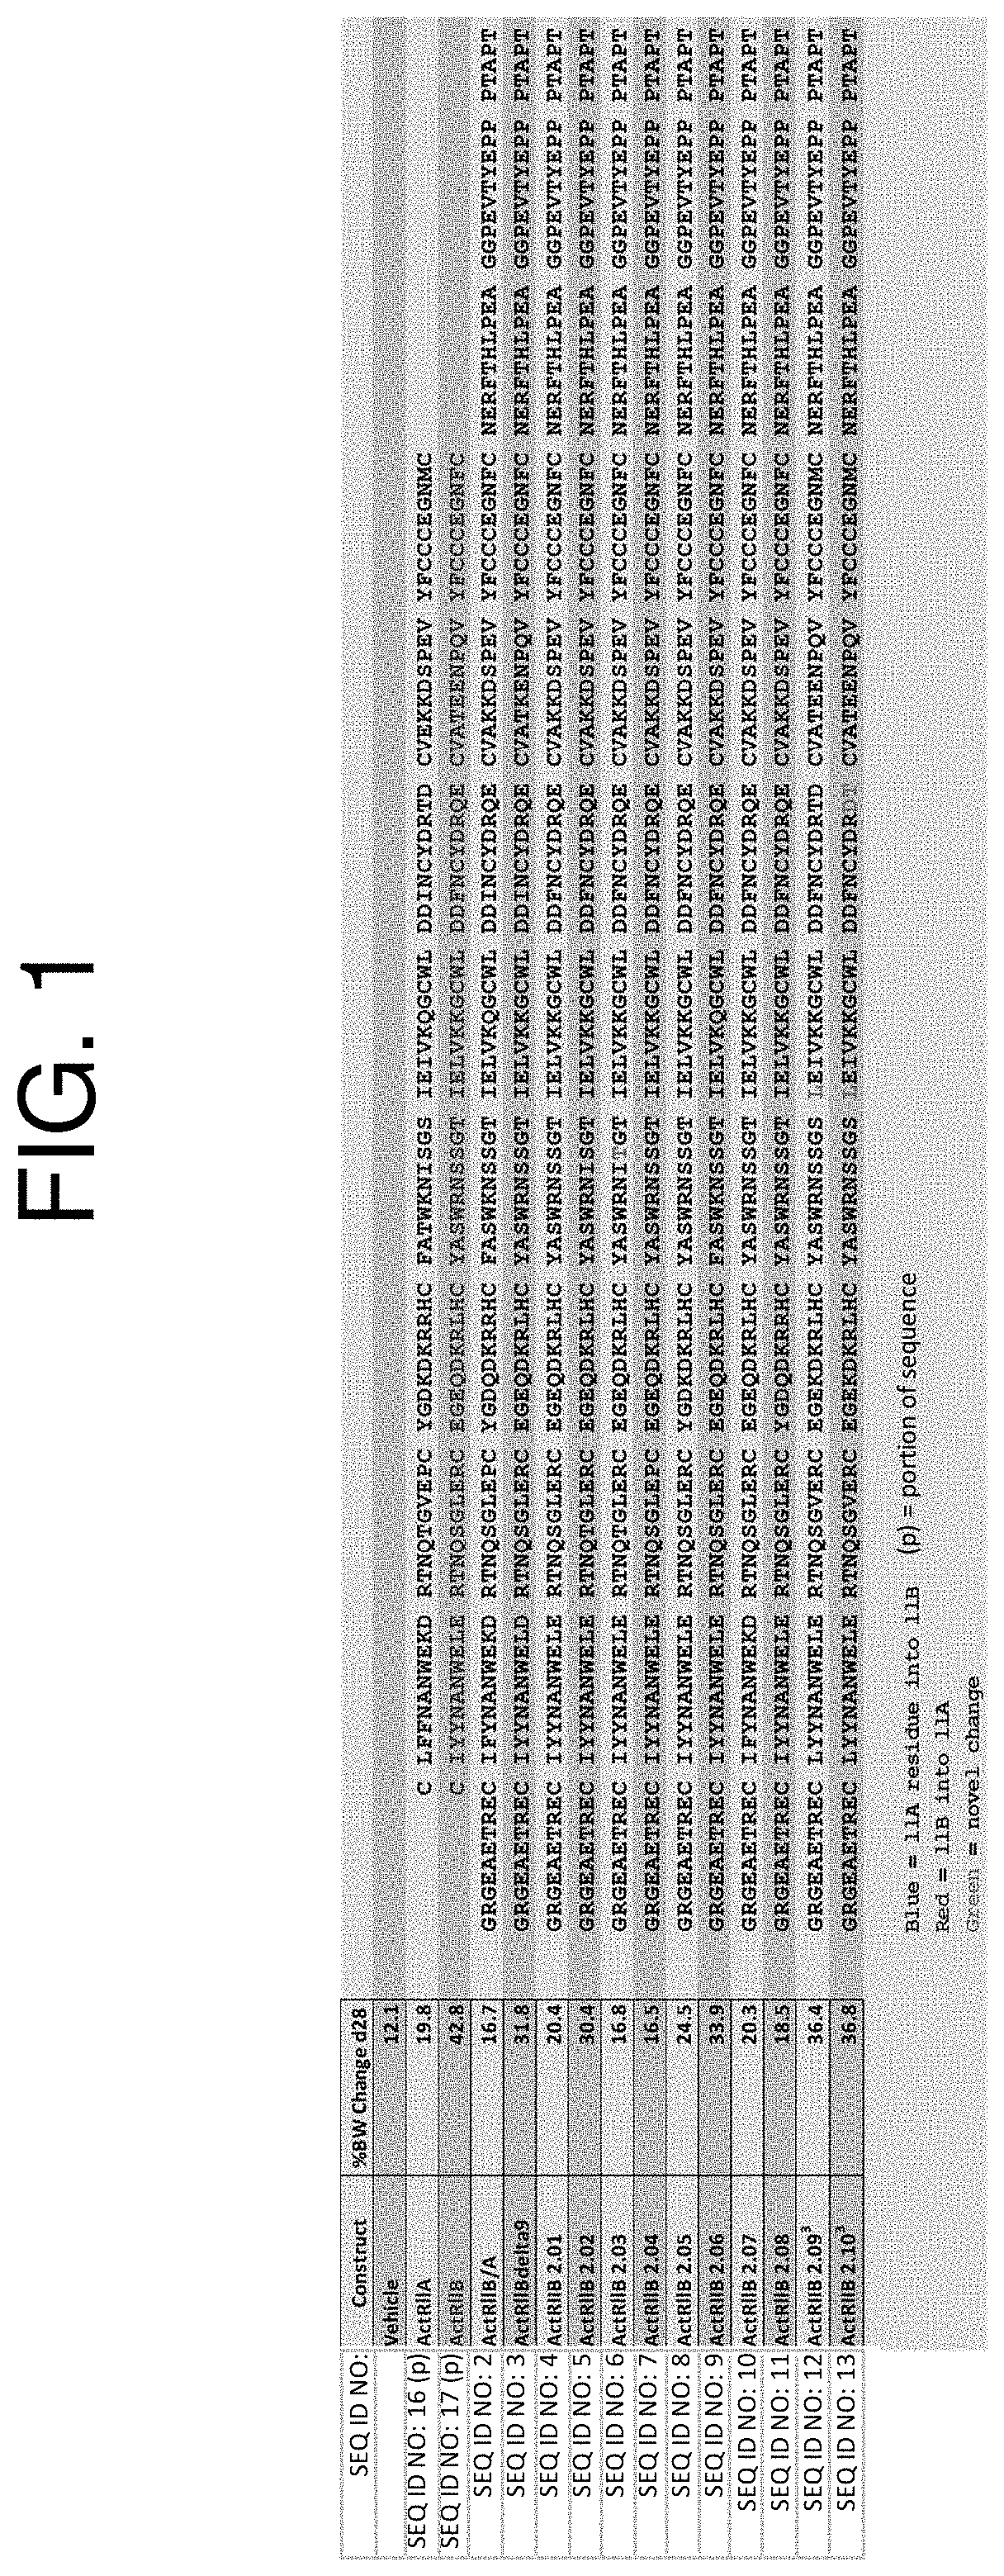 Activin receptor type iib variants and methods of use thereof